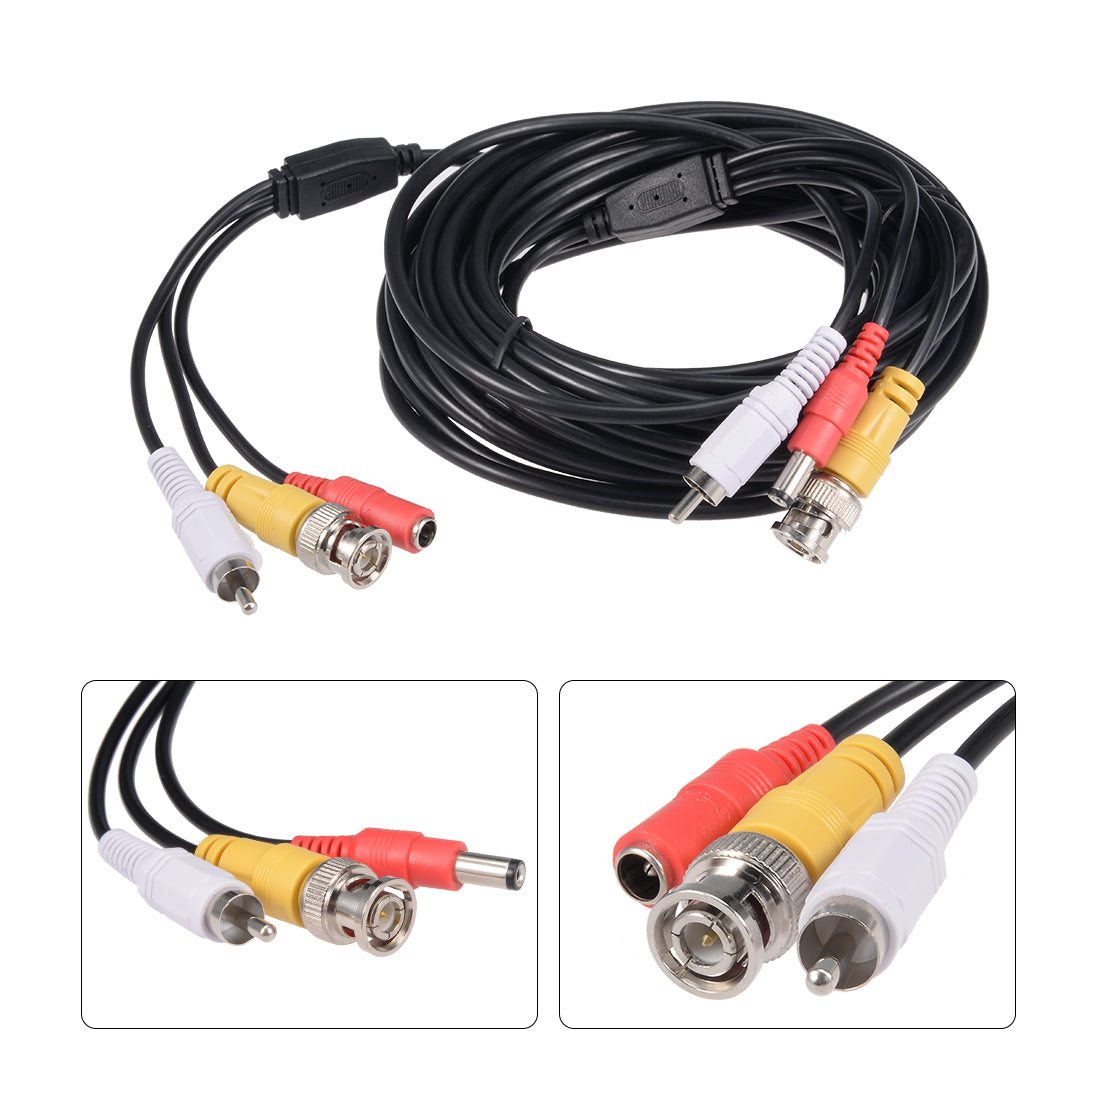 uxcell Uxcell 10M Black BNC RCA DC Video Power Extension Wire Cable with Two Connectors for Security Camera CCTV DVR Surveillance System Play